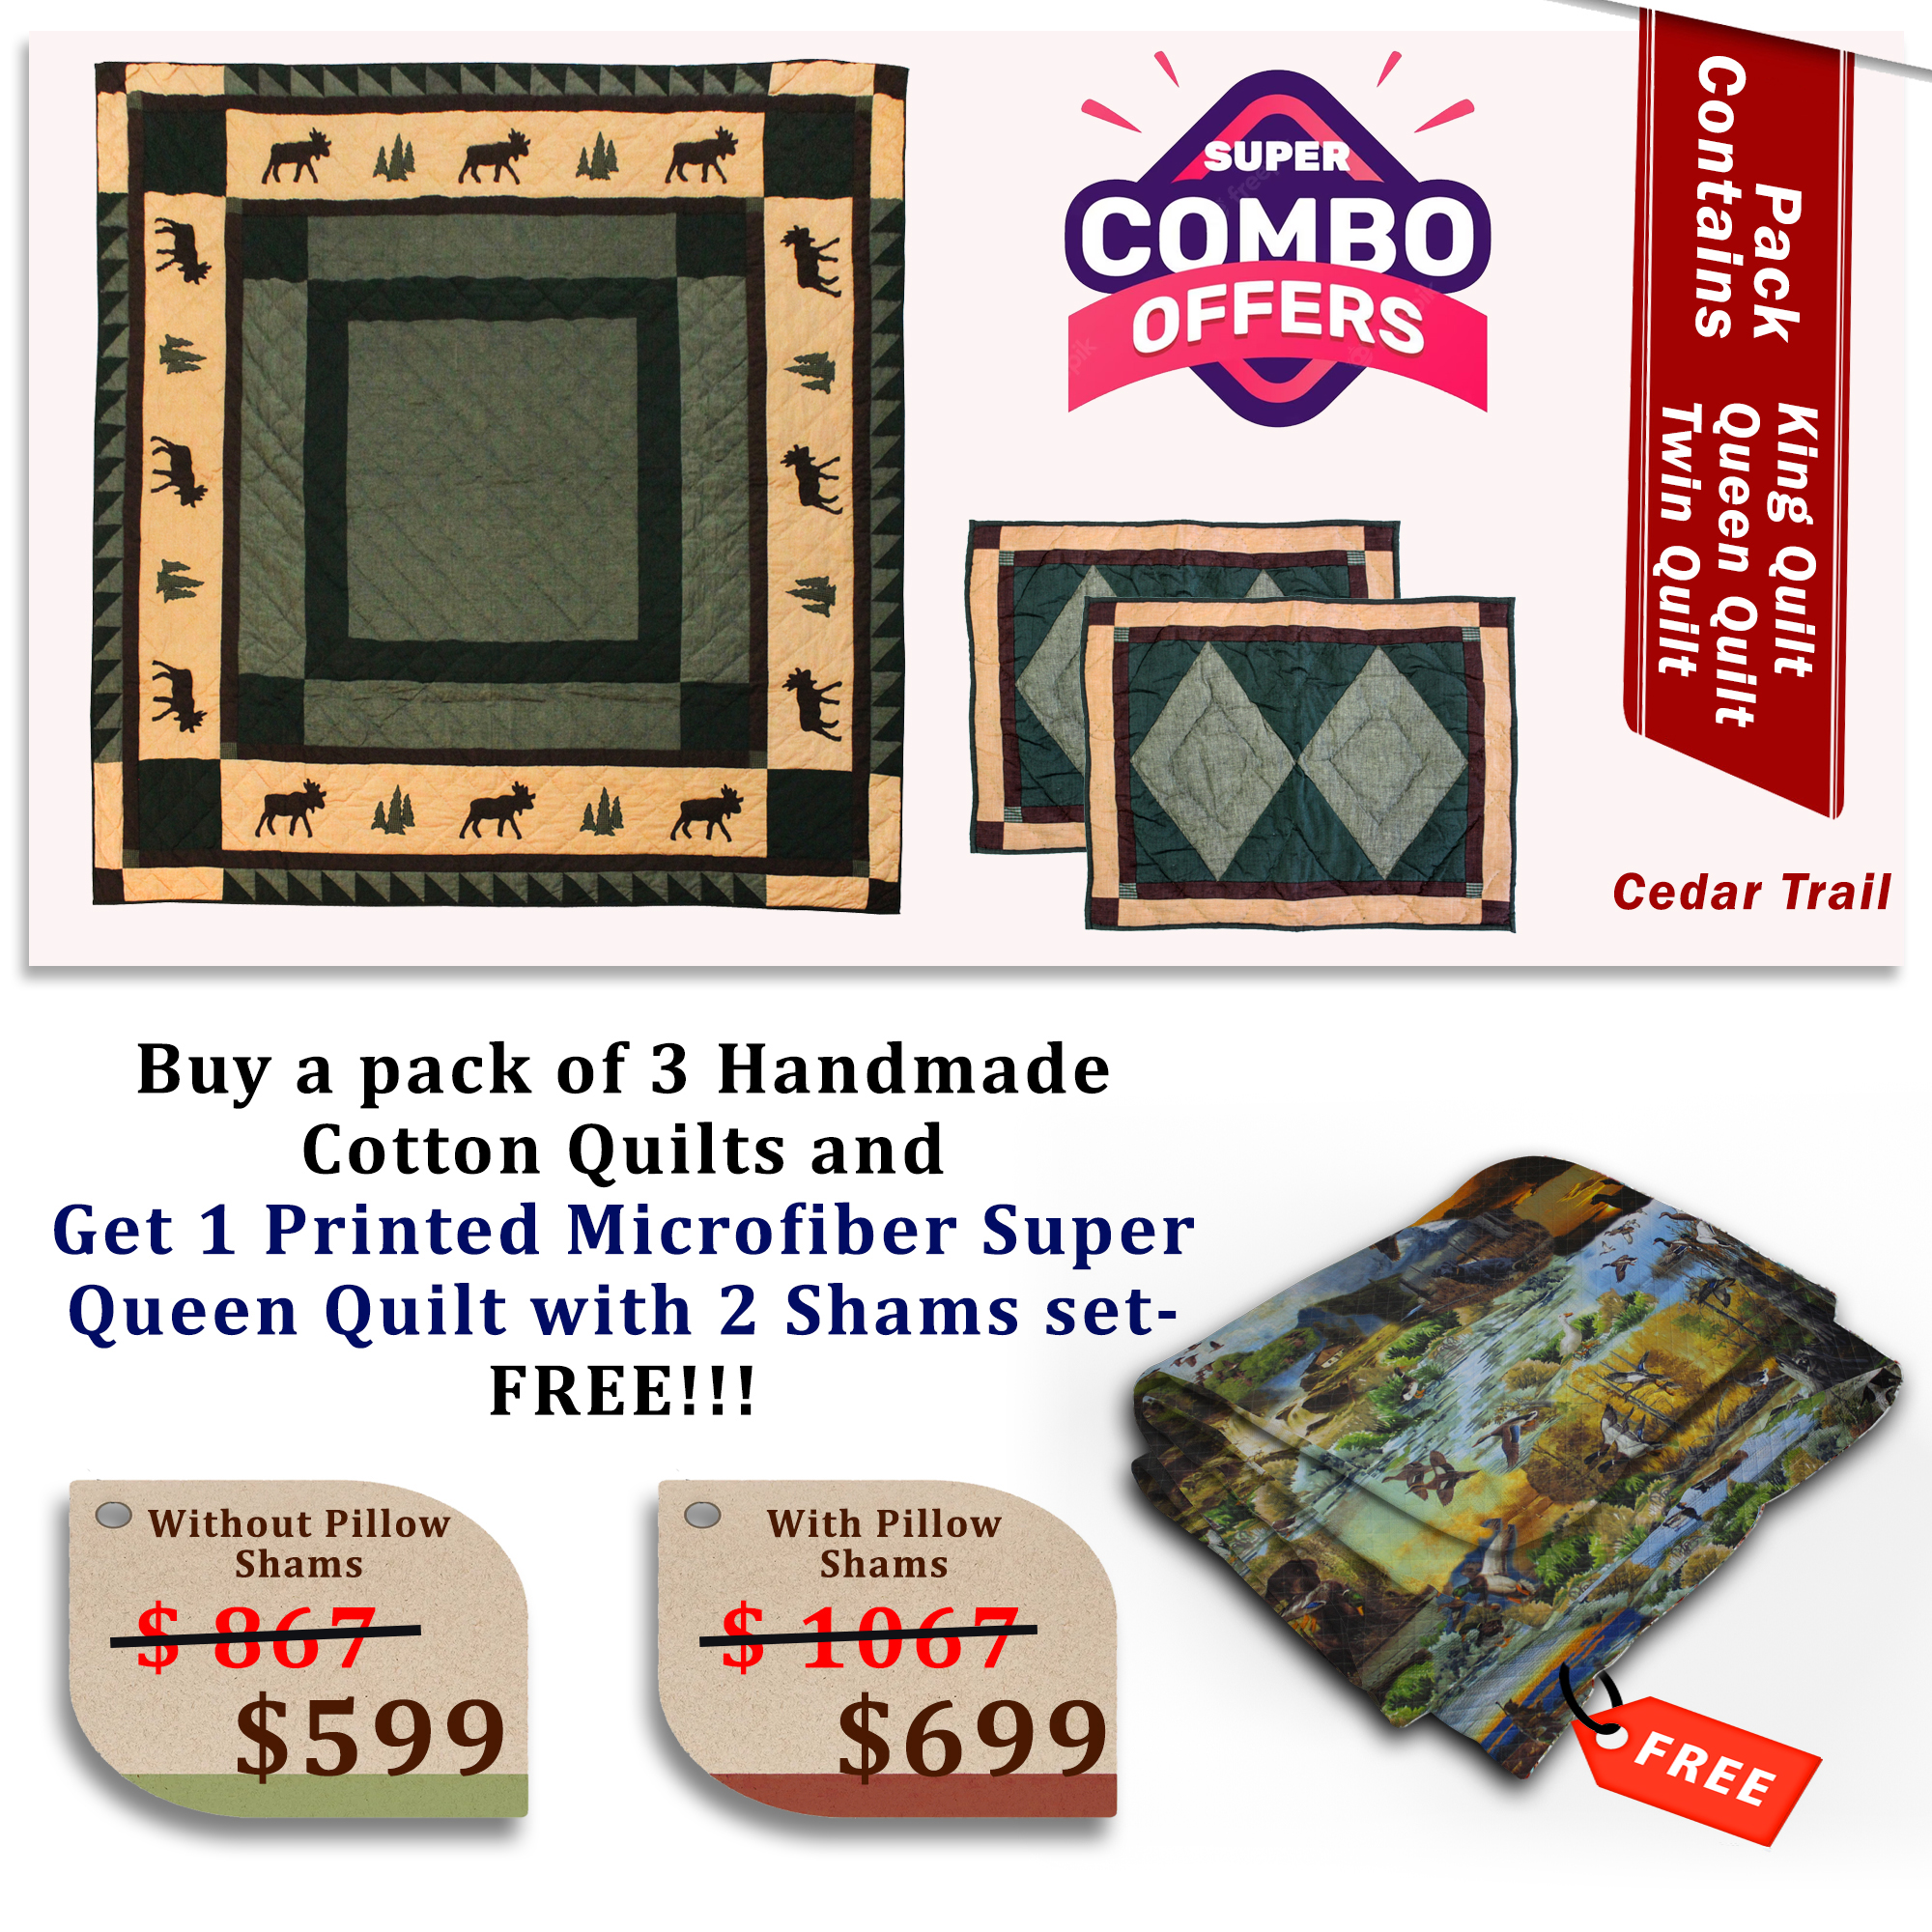 Cedar Trail - Handmade Cotton quilts | Matching pillow shams | Buy 3 cotton quilts and get 1 Printed Microfiber Super Queen Quilt with 2 Shams set FREE